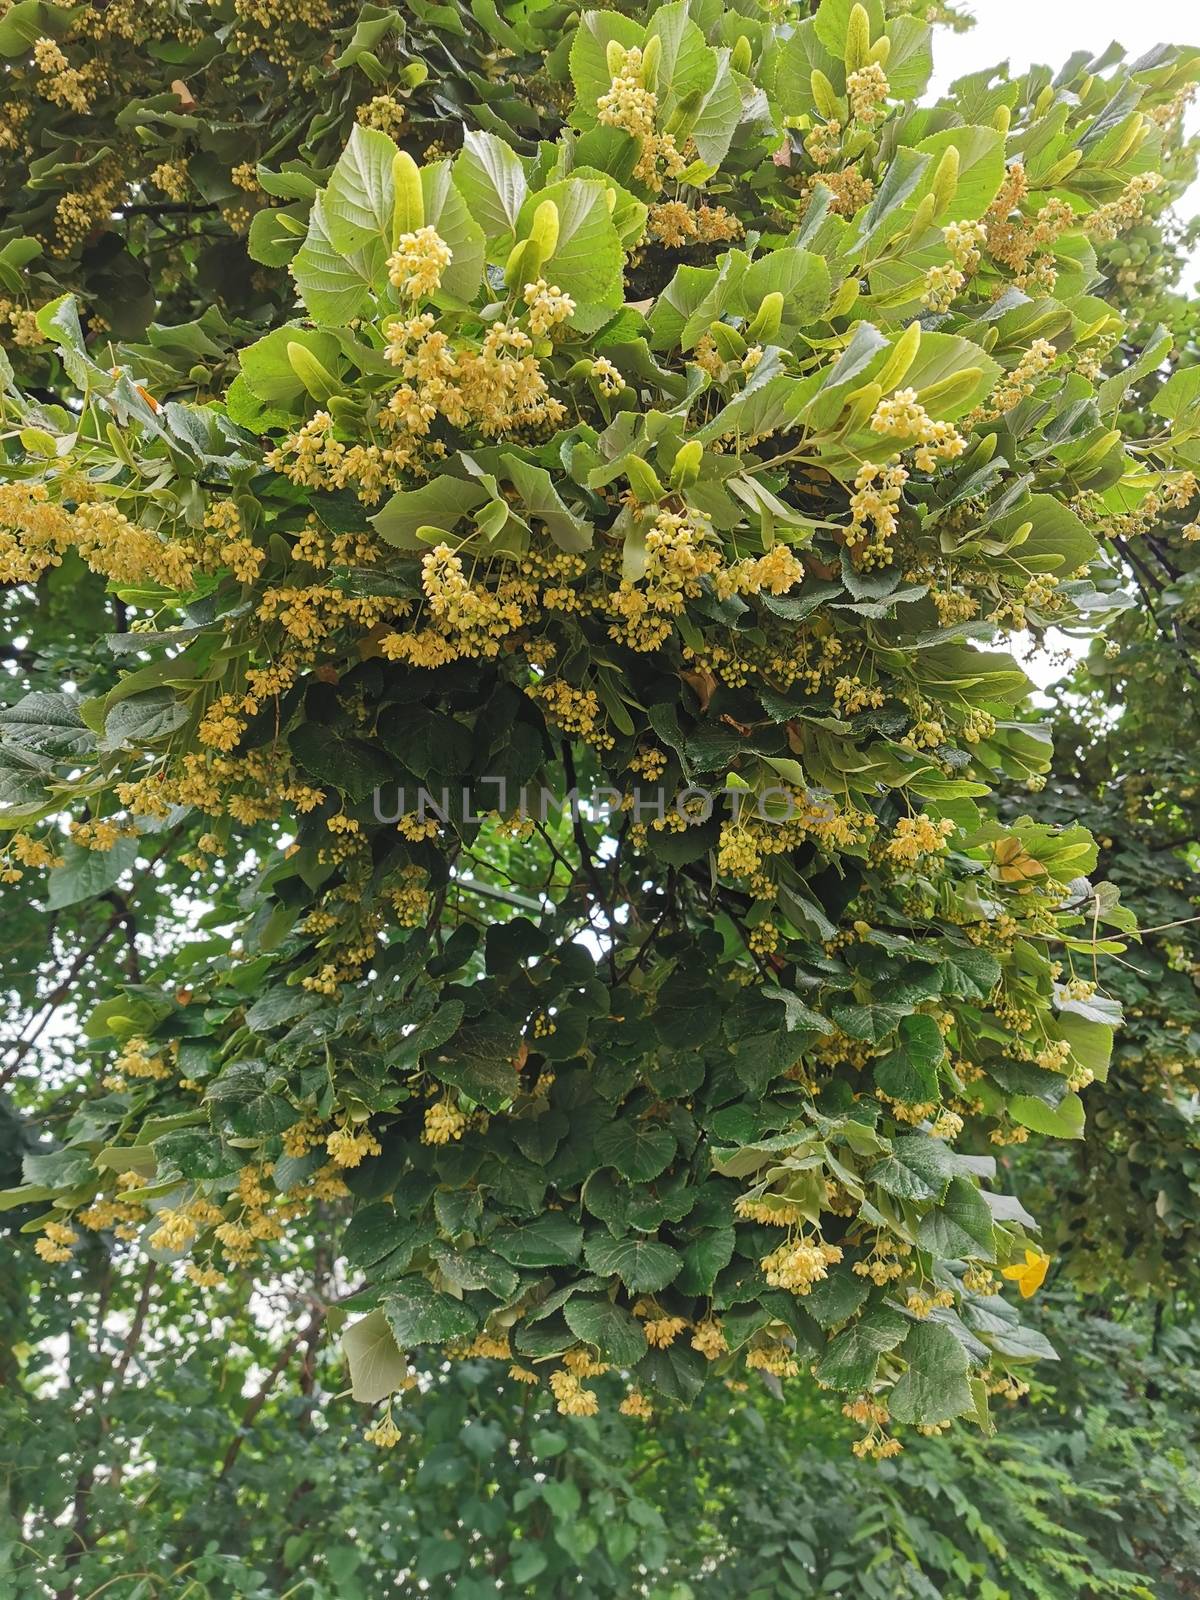 A bunch of green bananas growing on a tree. High quality photo